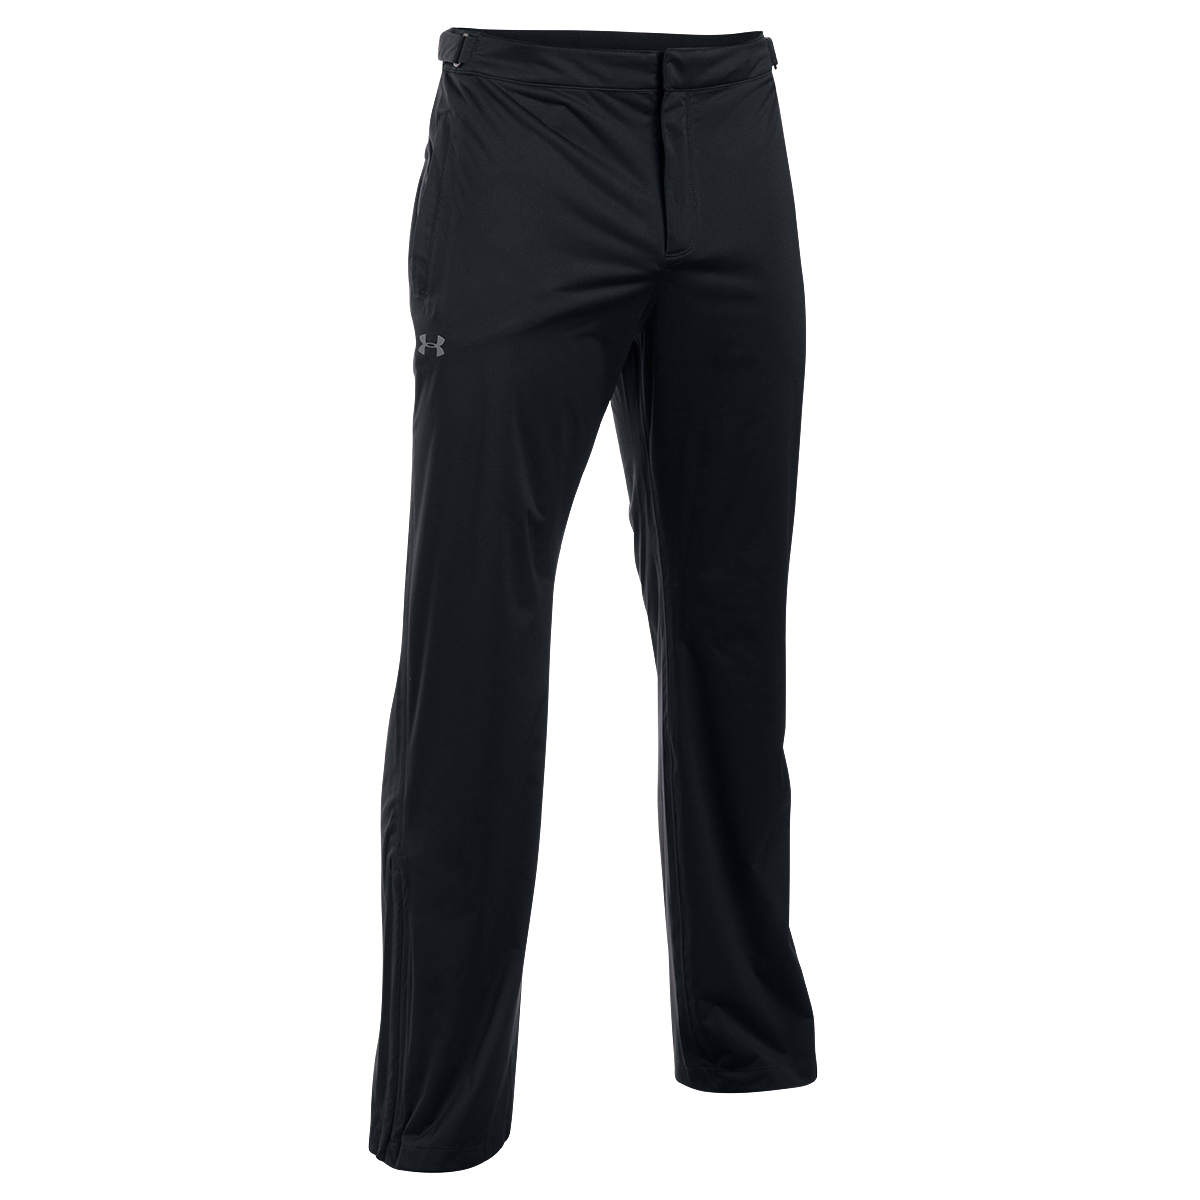 under armour storm 3 waterproof trousers review